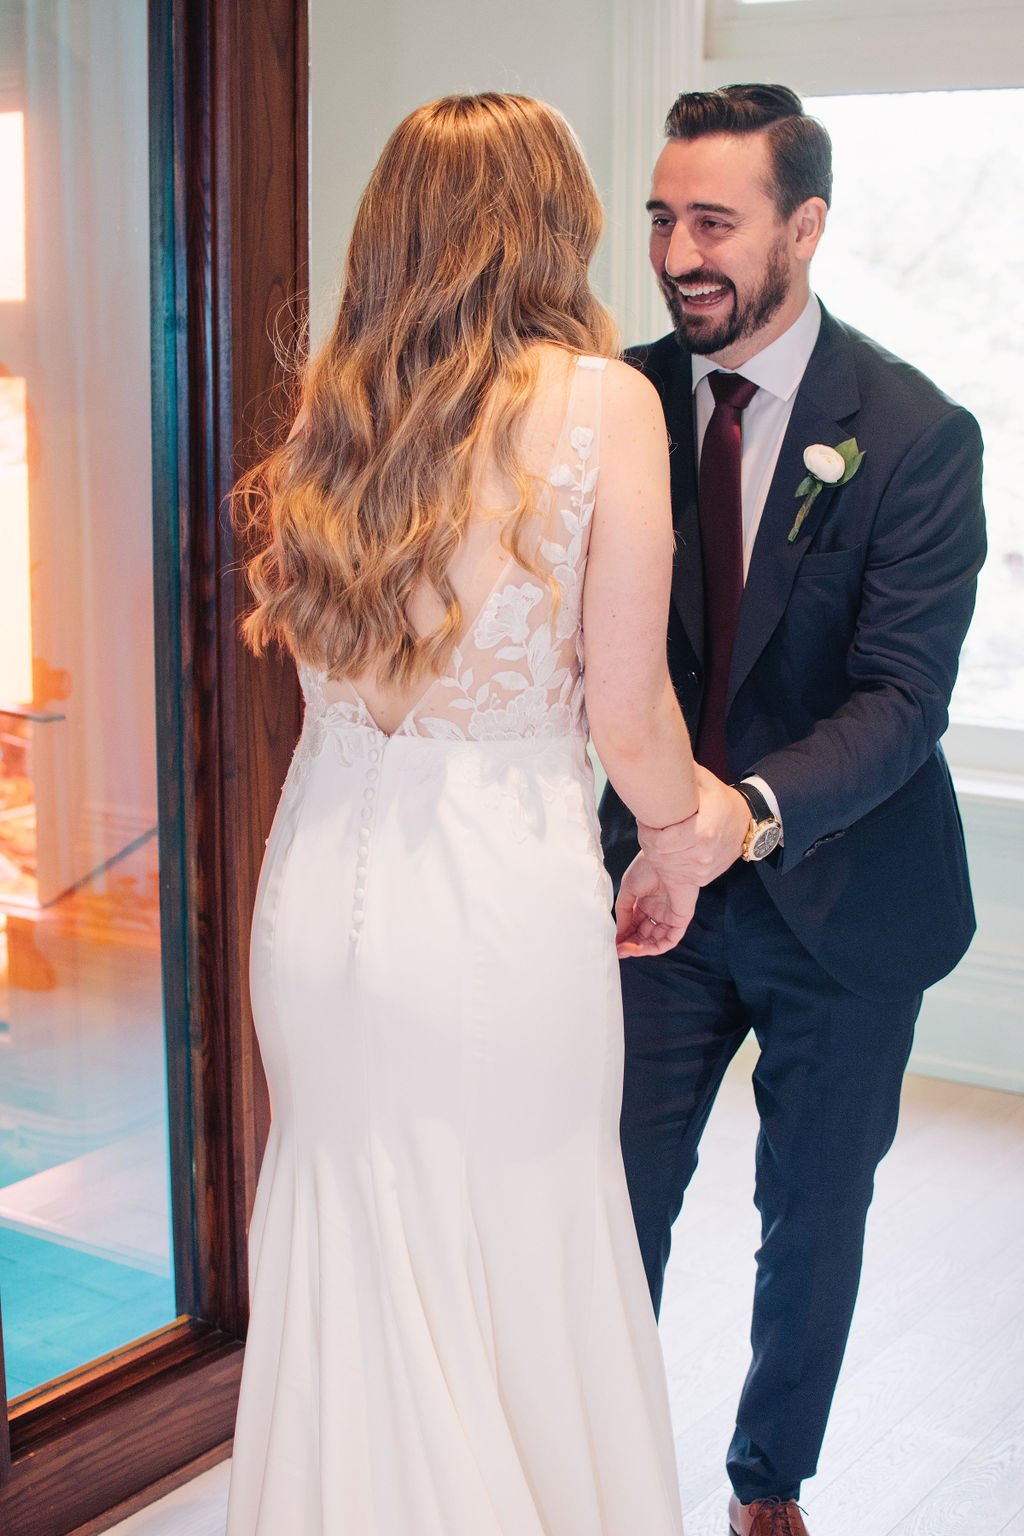 Couple's wedding day first look at Toronto's Gladstone House photographed by Toronto wedding photographers, Ugo Photography